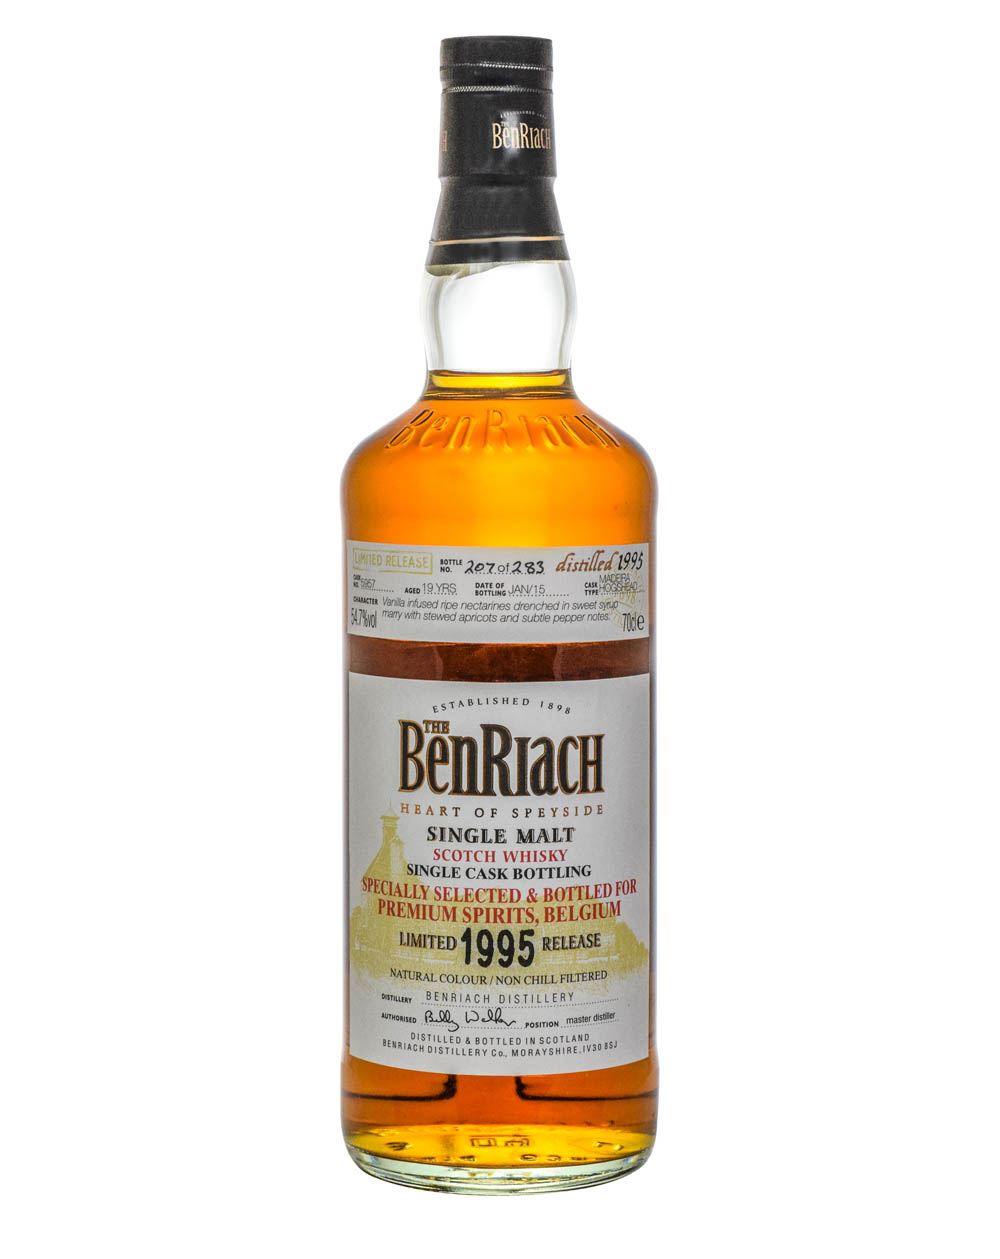 Benriach 19 Years Old Specially Selected & Bottled For Premium Spirits Belgium Limited 1995 Release Cask #5957 Must Have Malts MHM